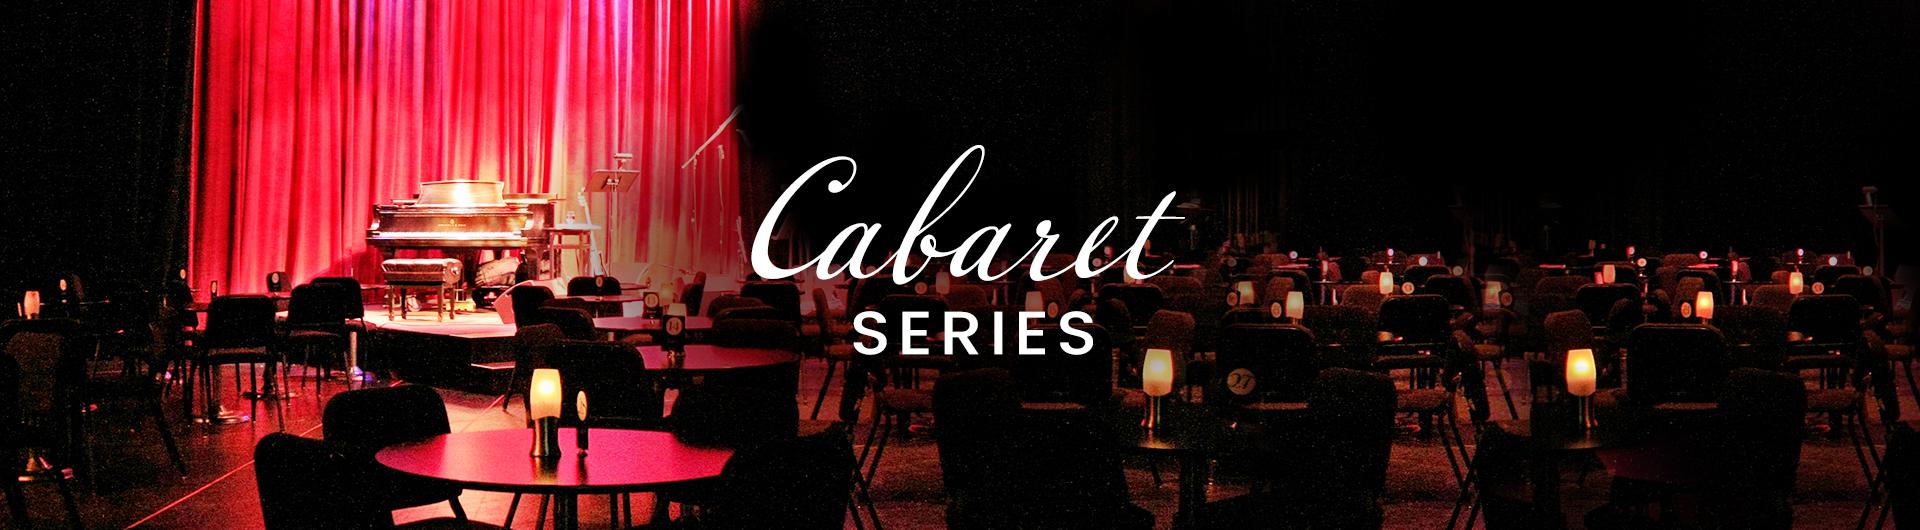 The words Cabaret Series appear over a photograph of the interior of the Carpenter Center. The cabaret stage and a dozen cabaret tables with candles can be seen.